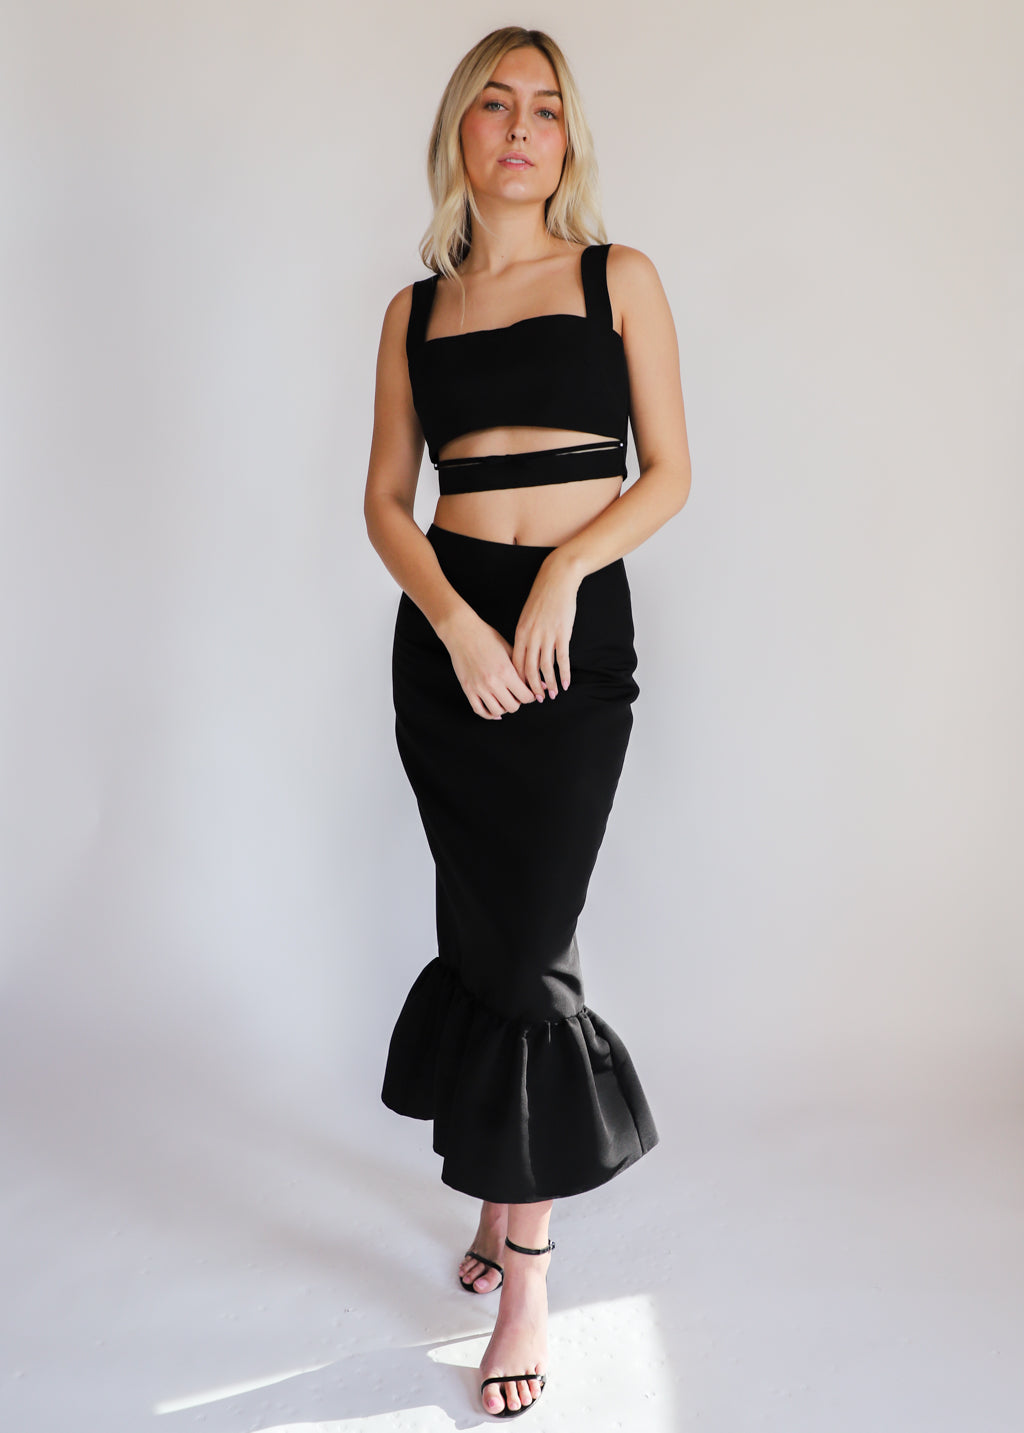 Women's Brandon Maxwell Sale, Up to 70% Off